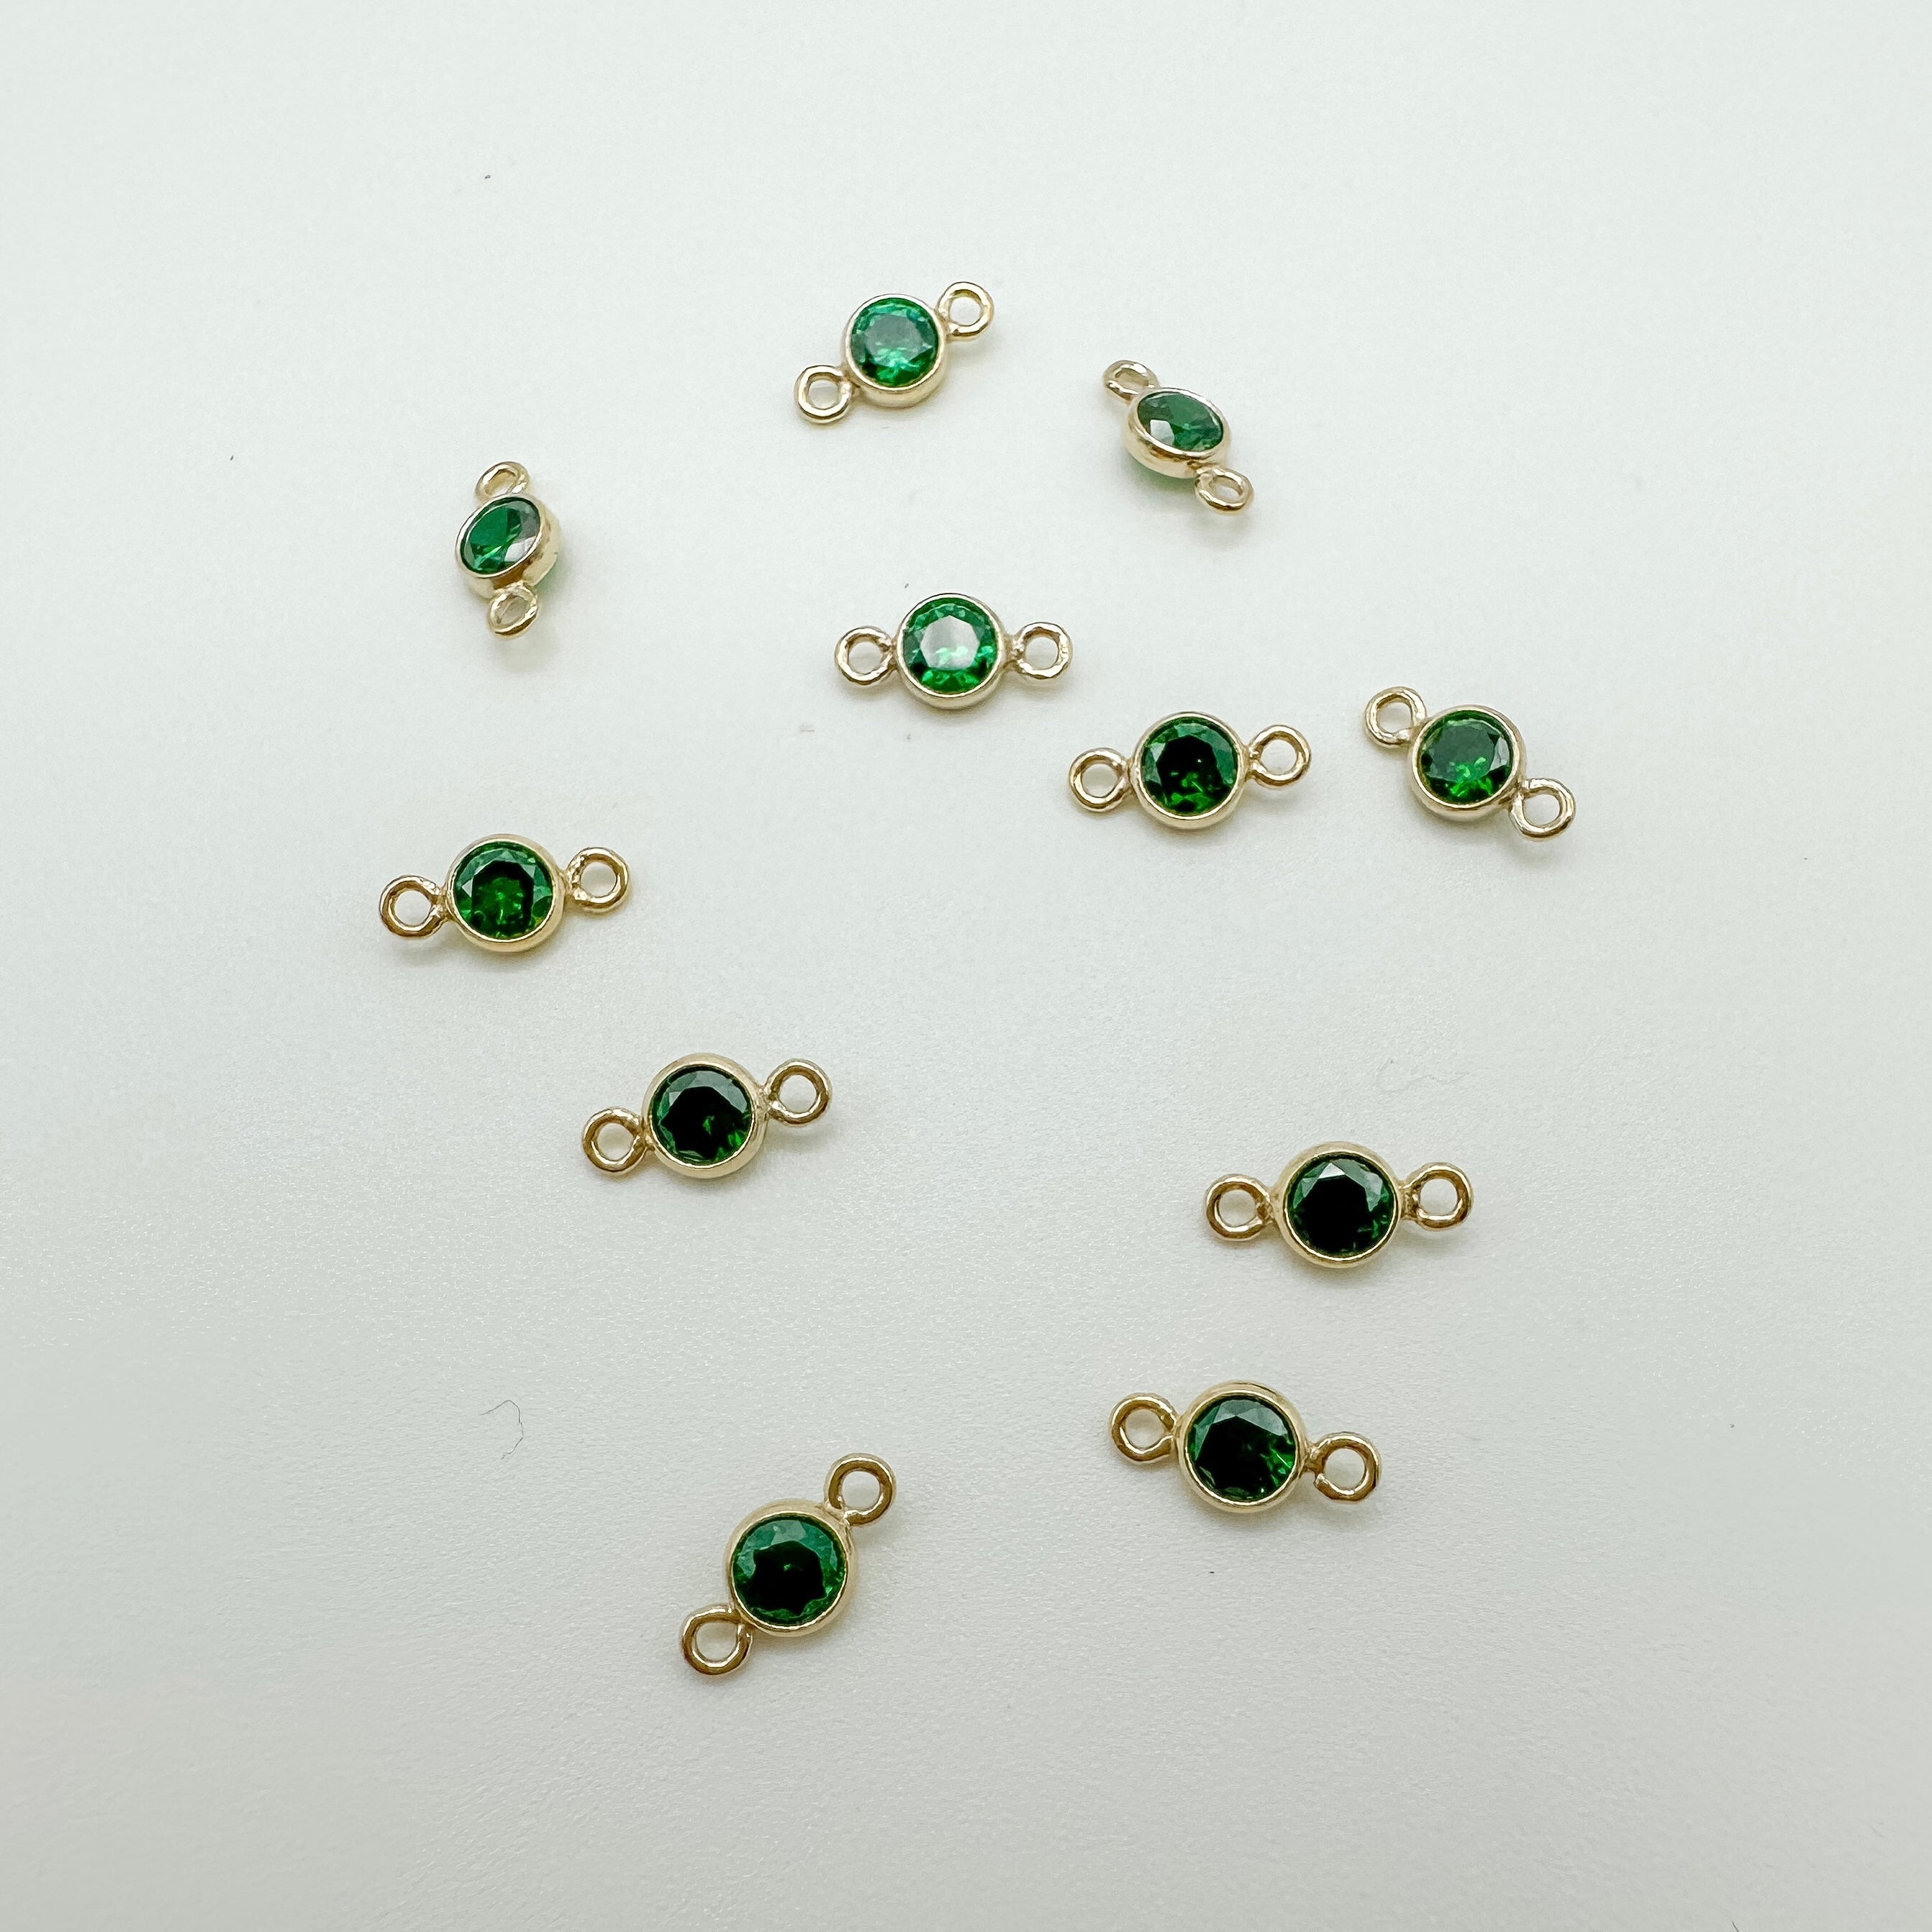 3mm GF birthstone connector / permanent jewelry supplies